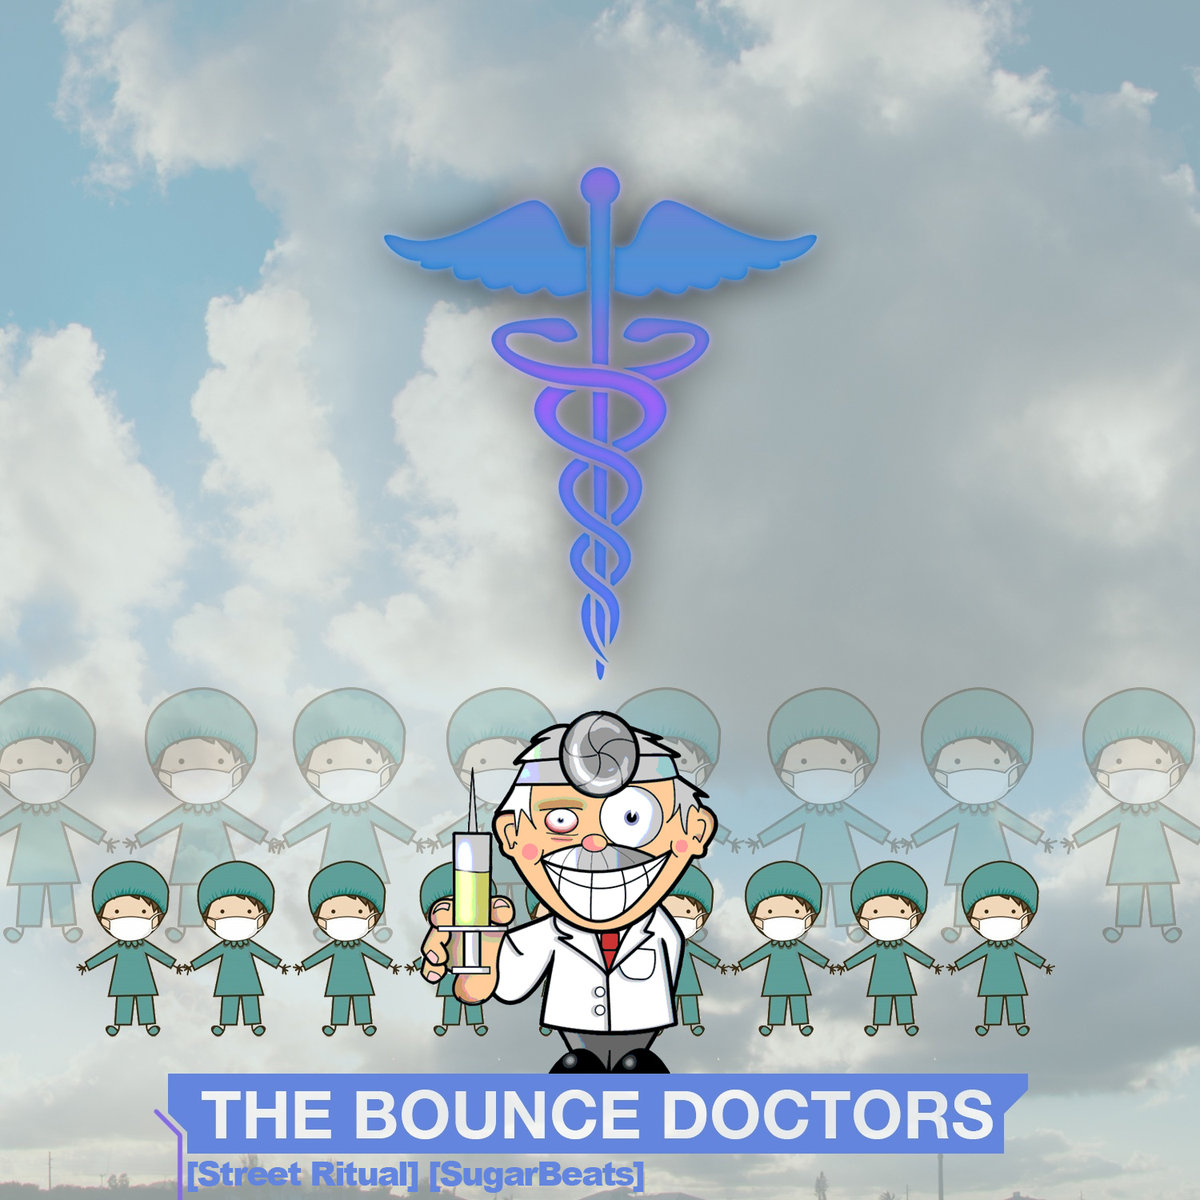 New Epoch - Hunters @ 'The Bounce Doctors' album (bass, chillstep)